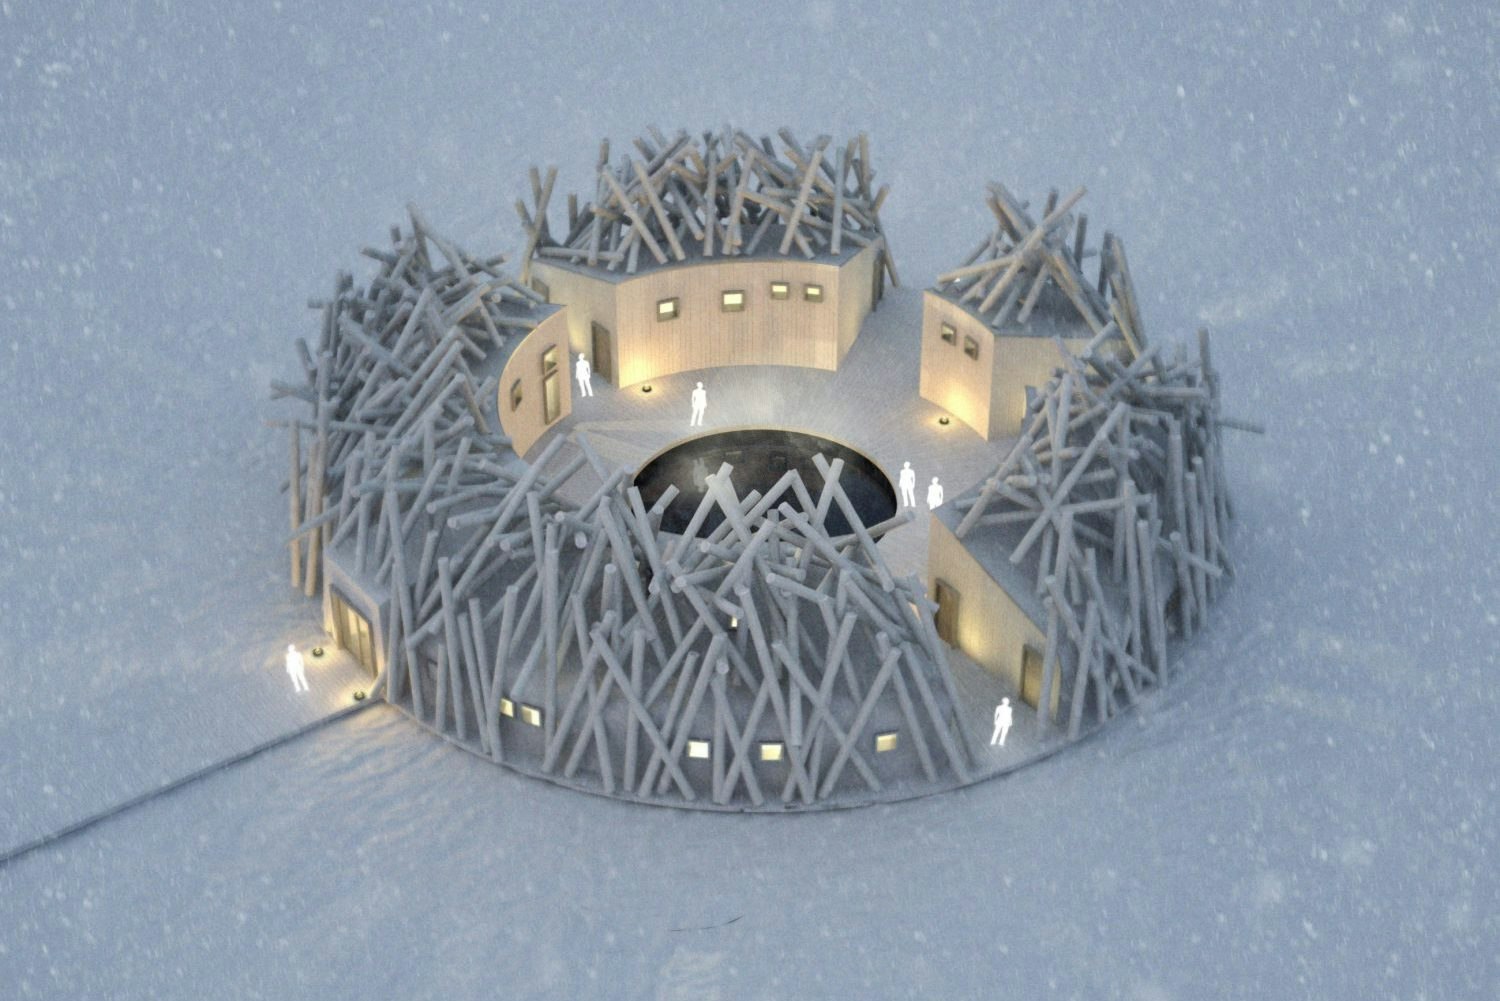 An artist's impression of an aerial view of the Arctic Bath in Sweden; the white, circular complex is frozen into the ice of a river.